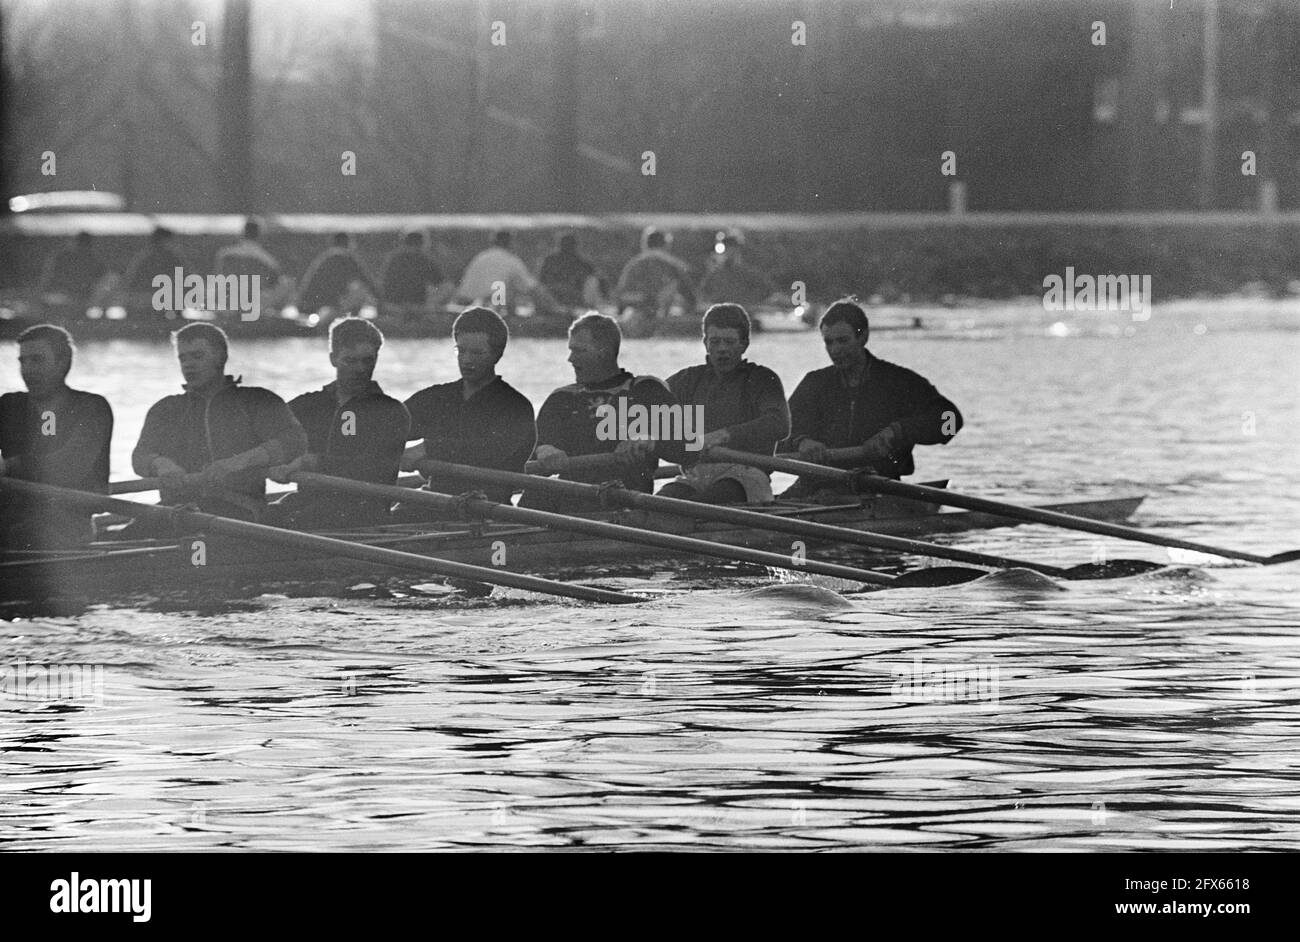 Head of the River next Sunday, Laga's old eight during training, 27 March 1968, rowing, training sessions, The Netherlands, 20th century press agency photo, news to remember, documentary, historic photography 1945-1990, visual stories, human history of the Twentieth Century, capturing moments in time Stock Photo